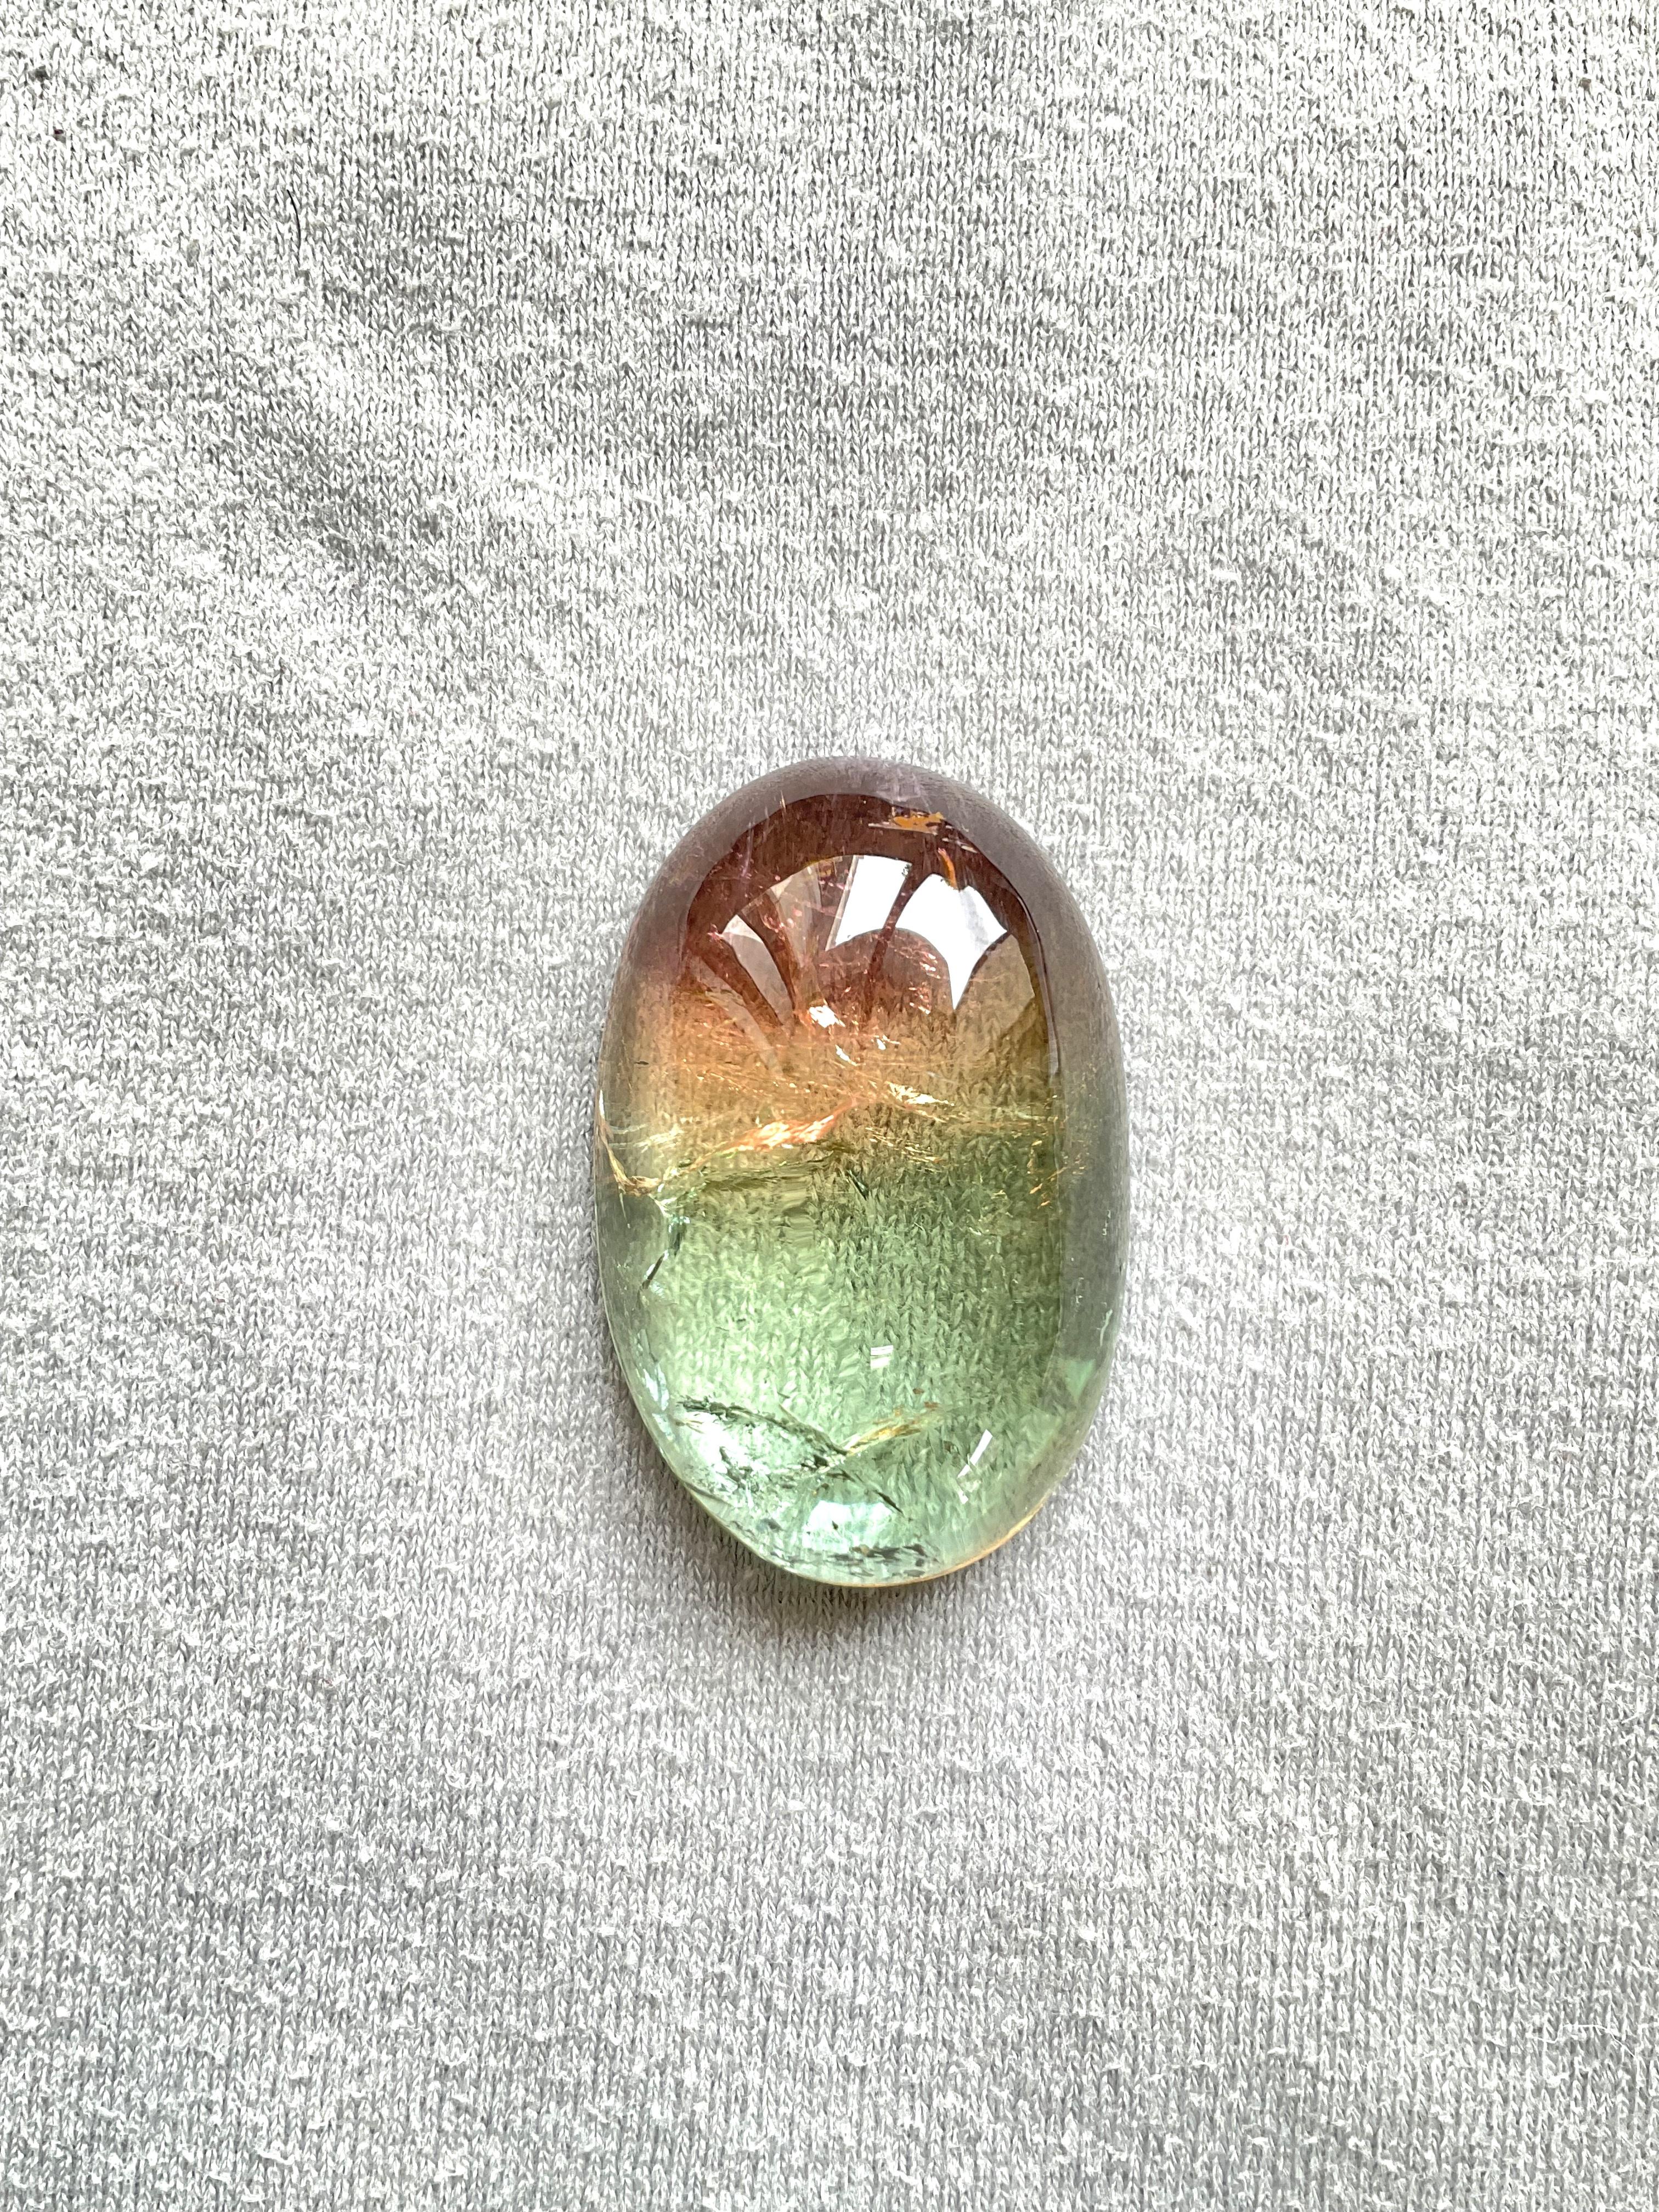 Art Deco 105.03 Carats Bi Color Tourmaline Oval cabochon very good quality color variety For Sale